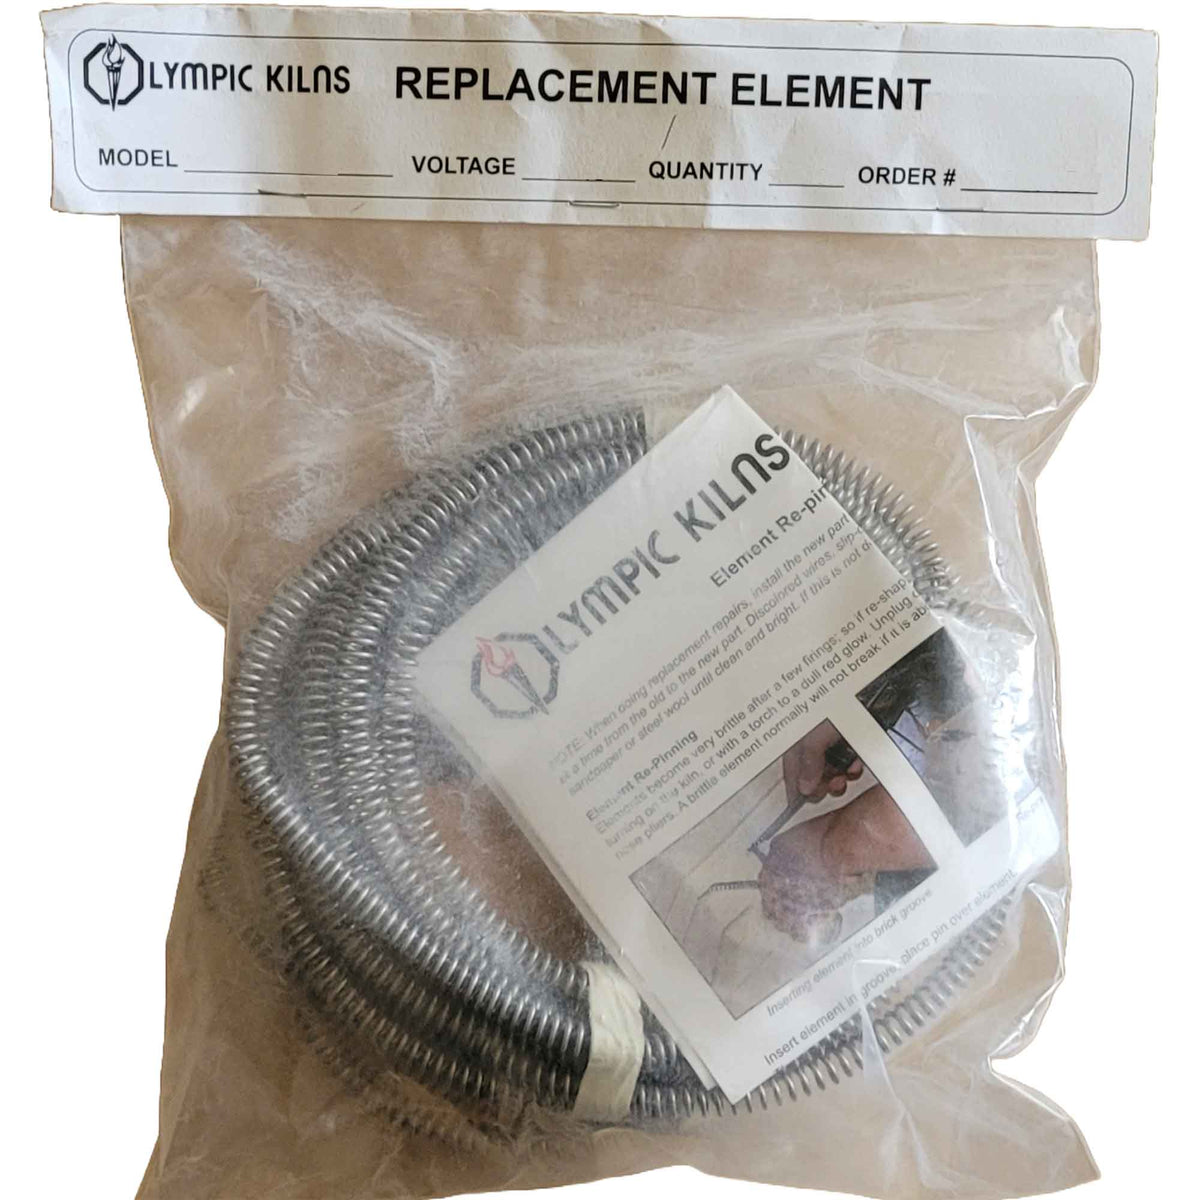 Olympic Kiln Replacement Element for Model 2318 or 2318H